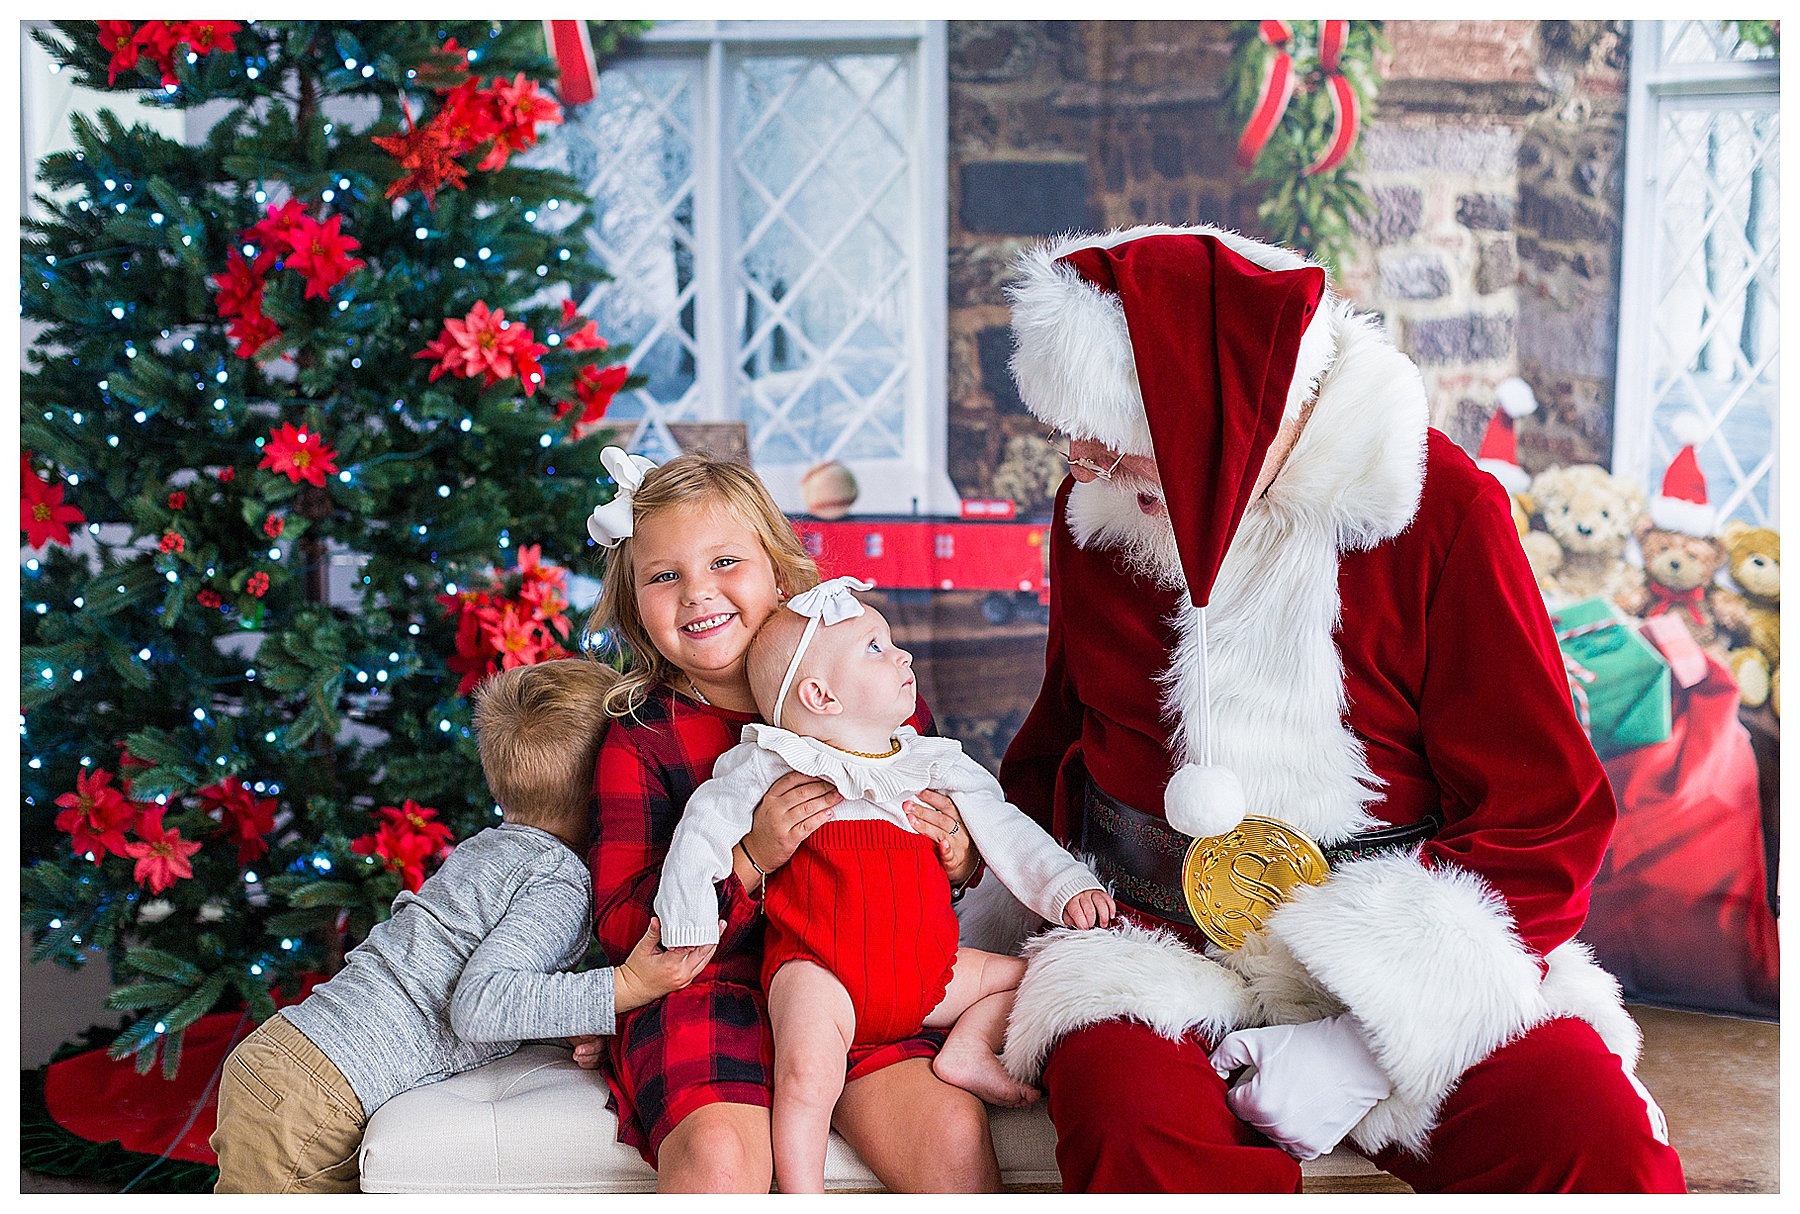 A little girl smiling in front of a Christmas tree, while her little brother hides behind her and the little sister in her lap stares up mesmerized by Santa.